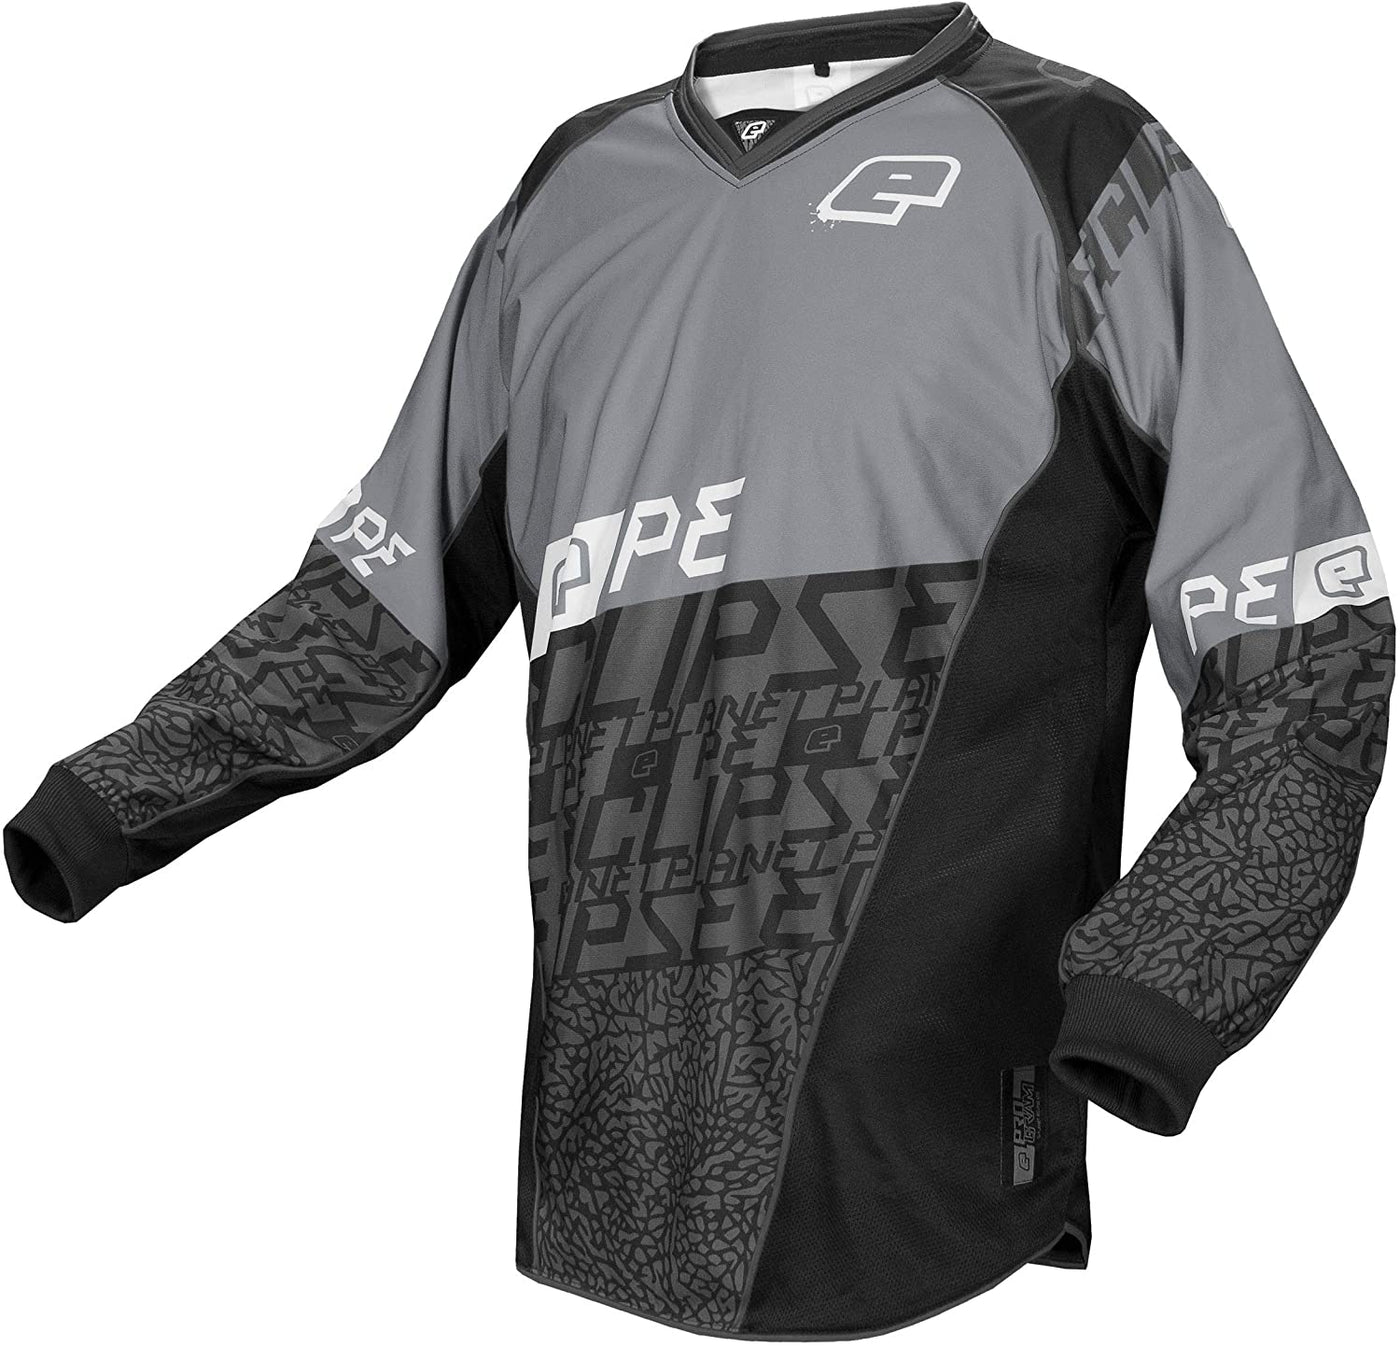 Planet Eclipse FANTM Paintball Jersey